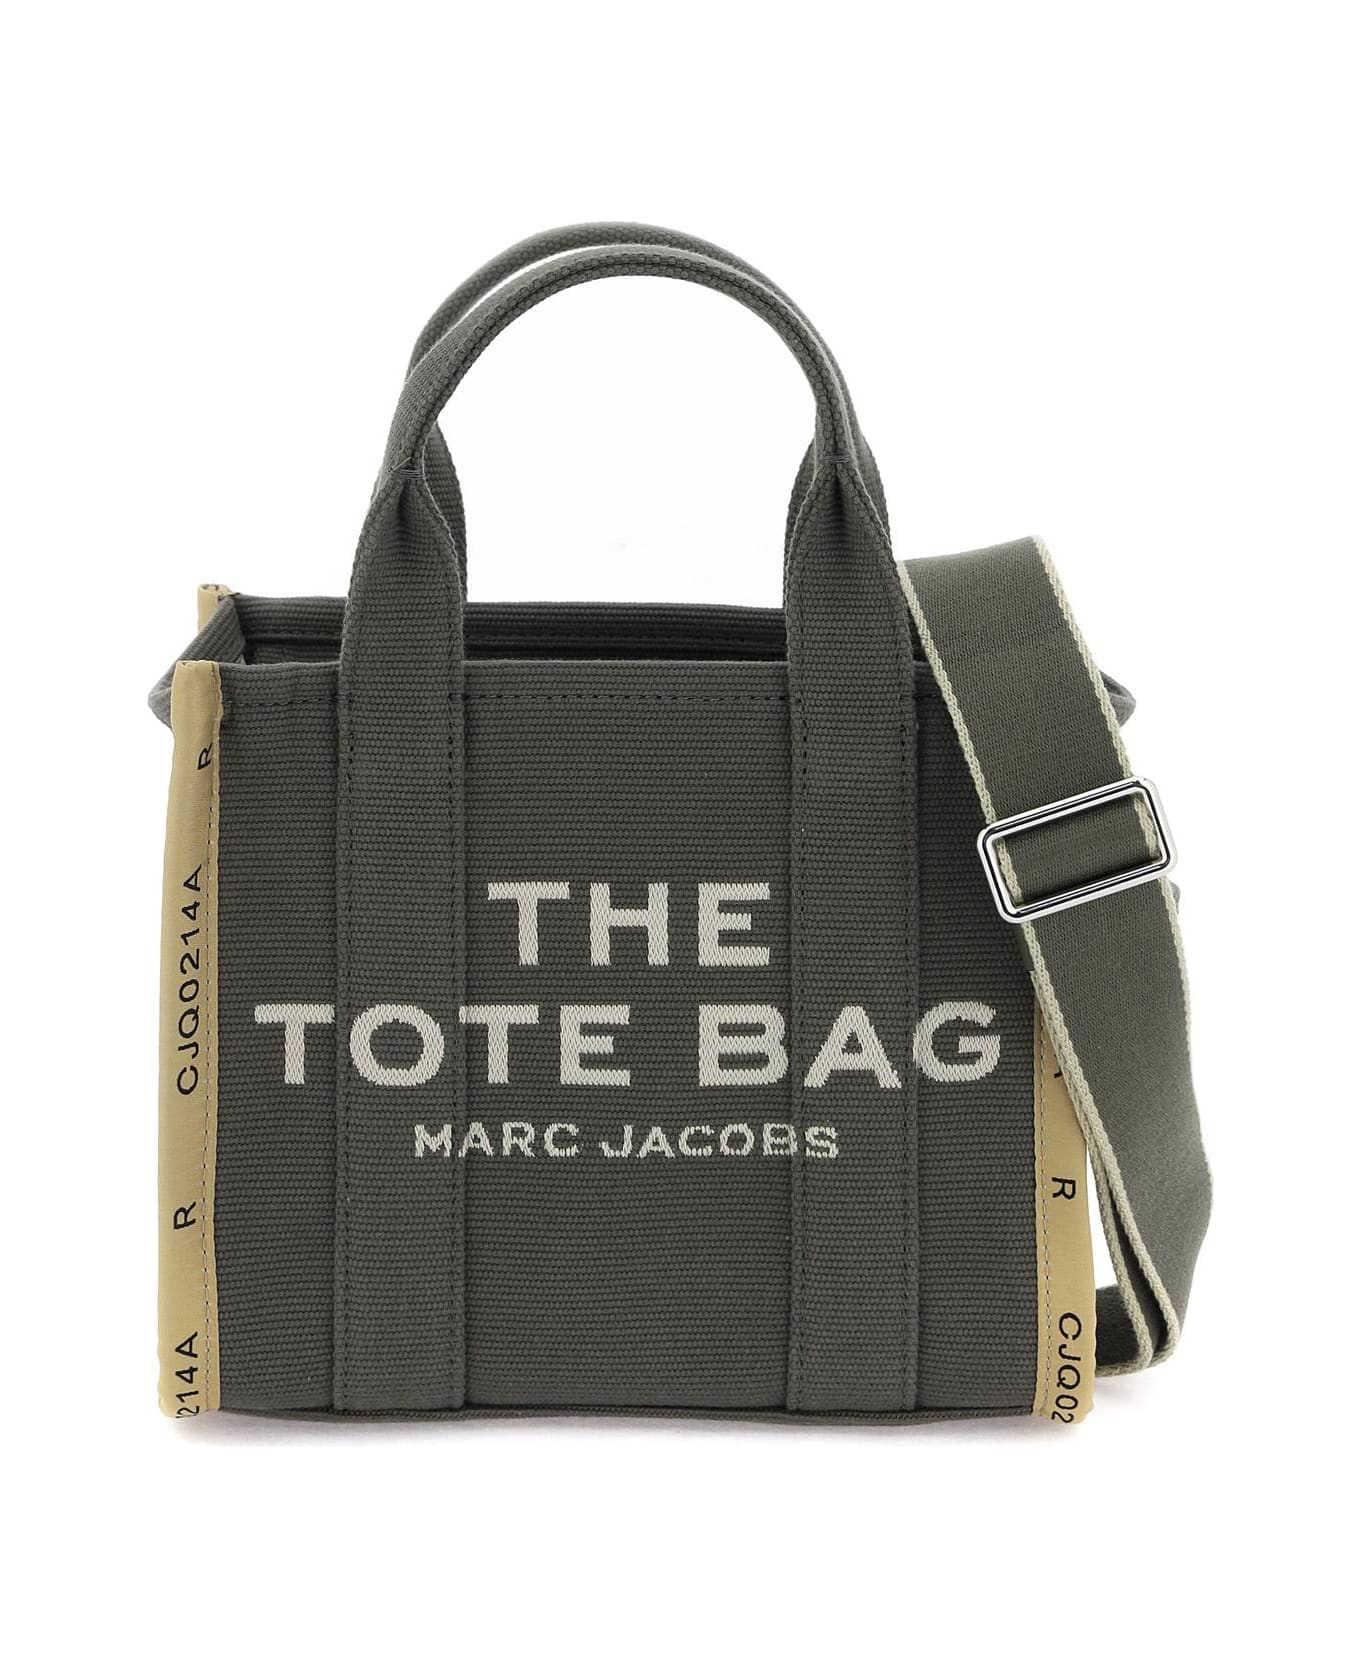 Marc Jacobs Traveler Tote In Green Cotton - BRONZE GREEN (Green) トートバッグ